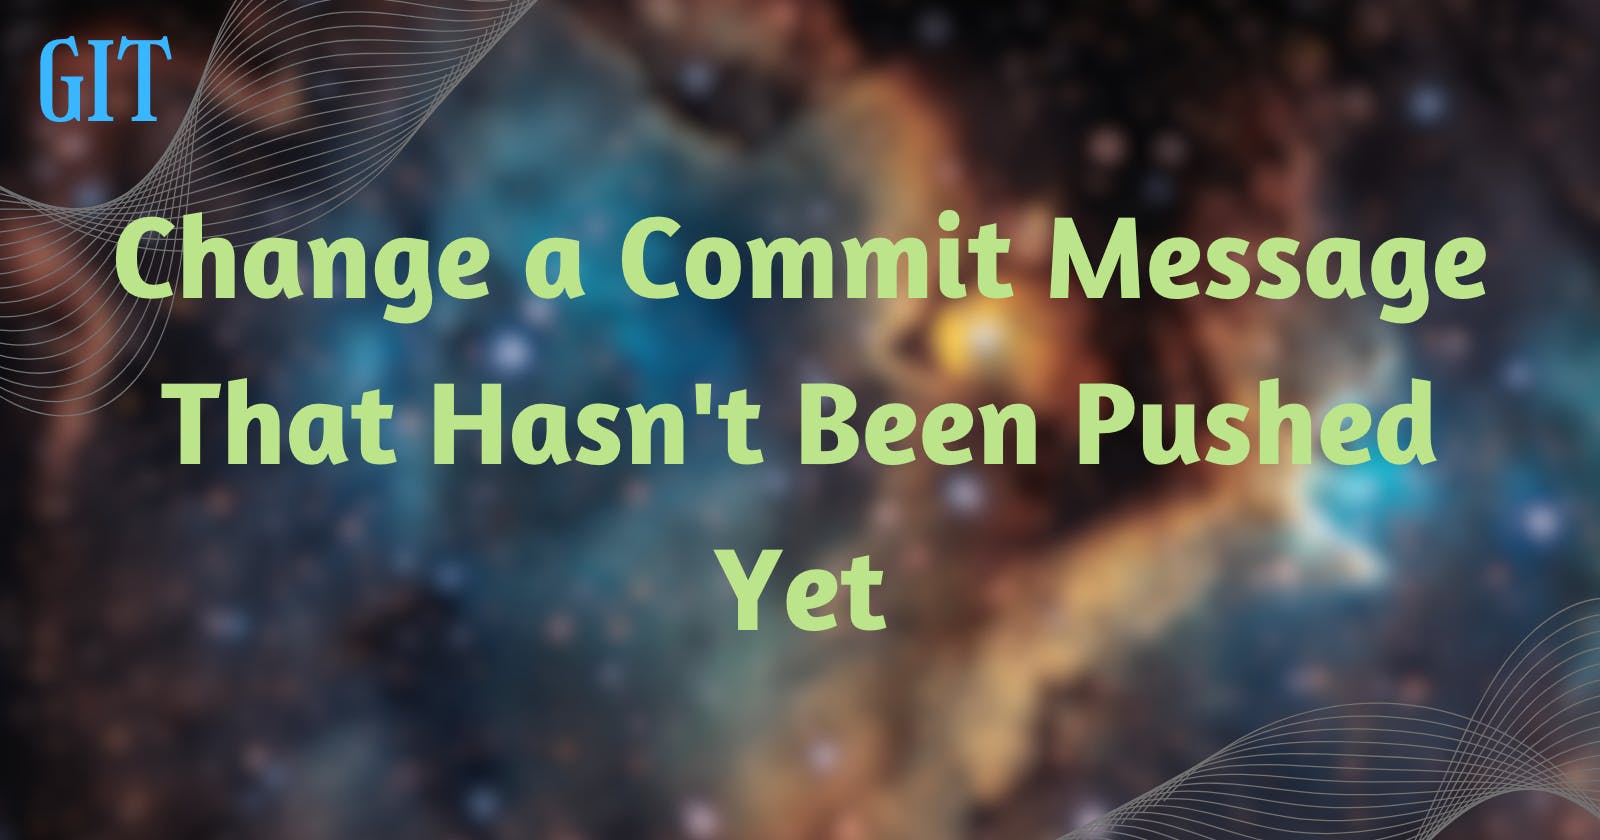 Change a Commit Message That Hasn't Been Pushed Yet